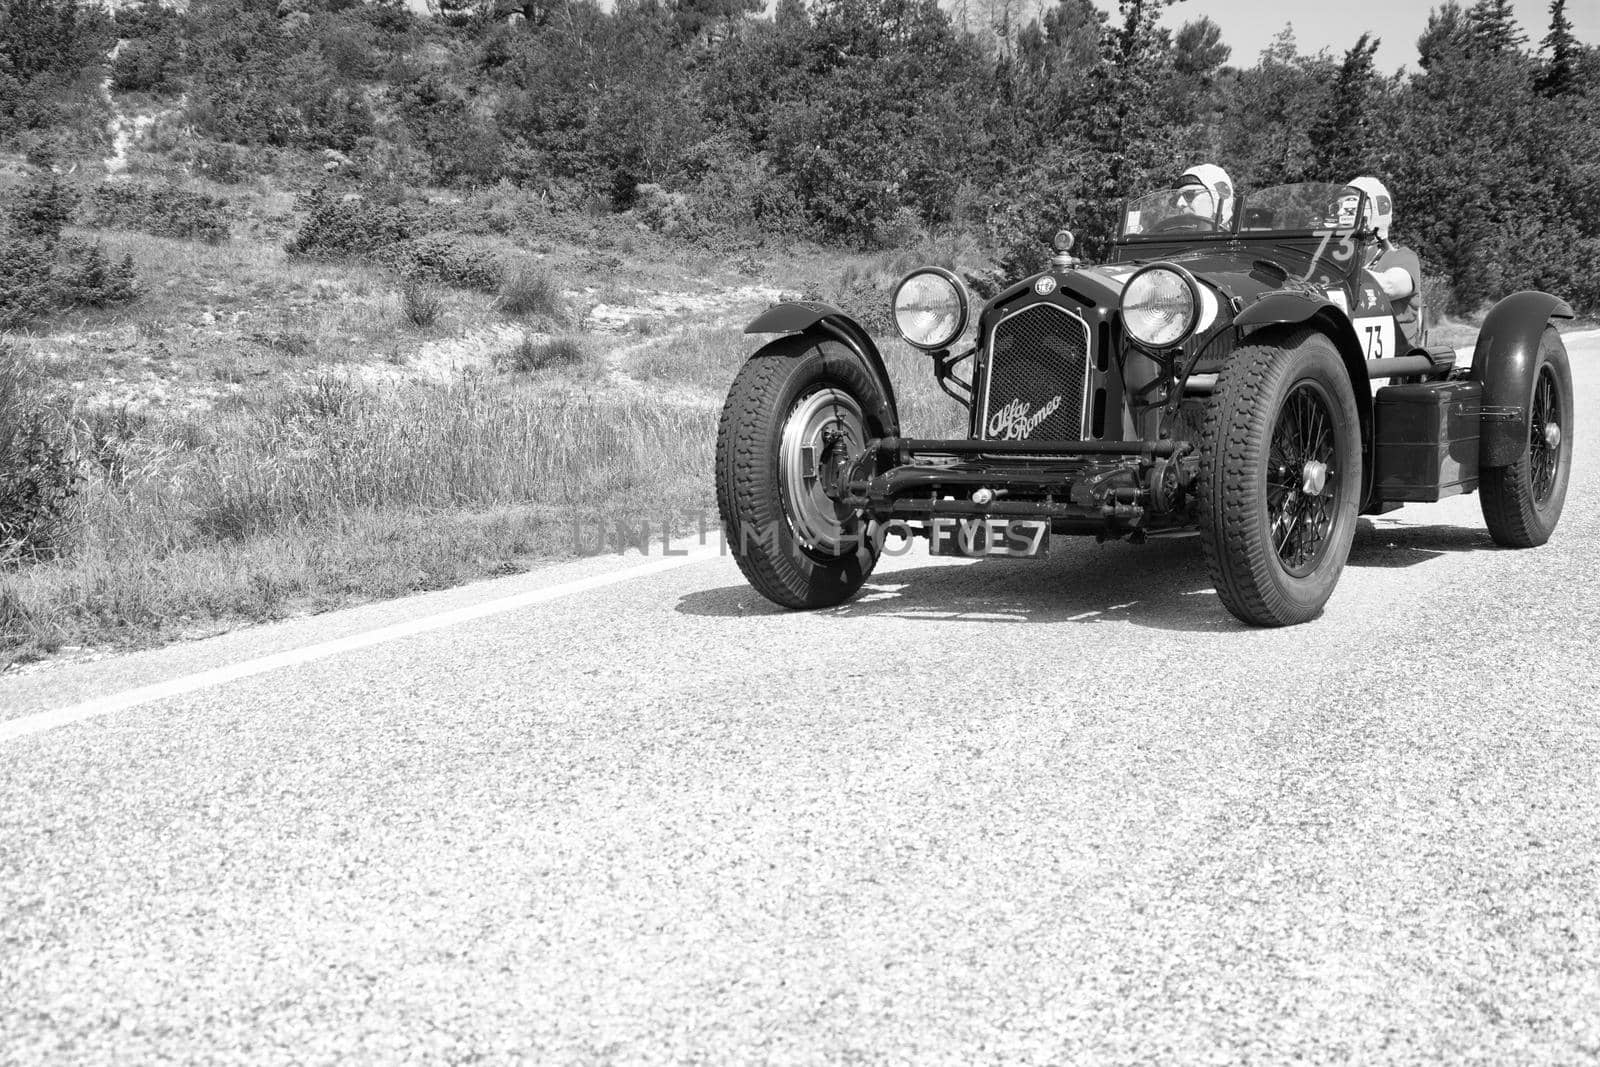 ALFA ROMEO 8C 2300 MONZA 1933 on an old racing car in rally Mille Miglia 2022 the famous italian historical race (1927-1957 by massimocampanari